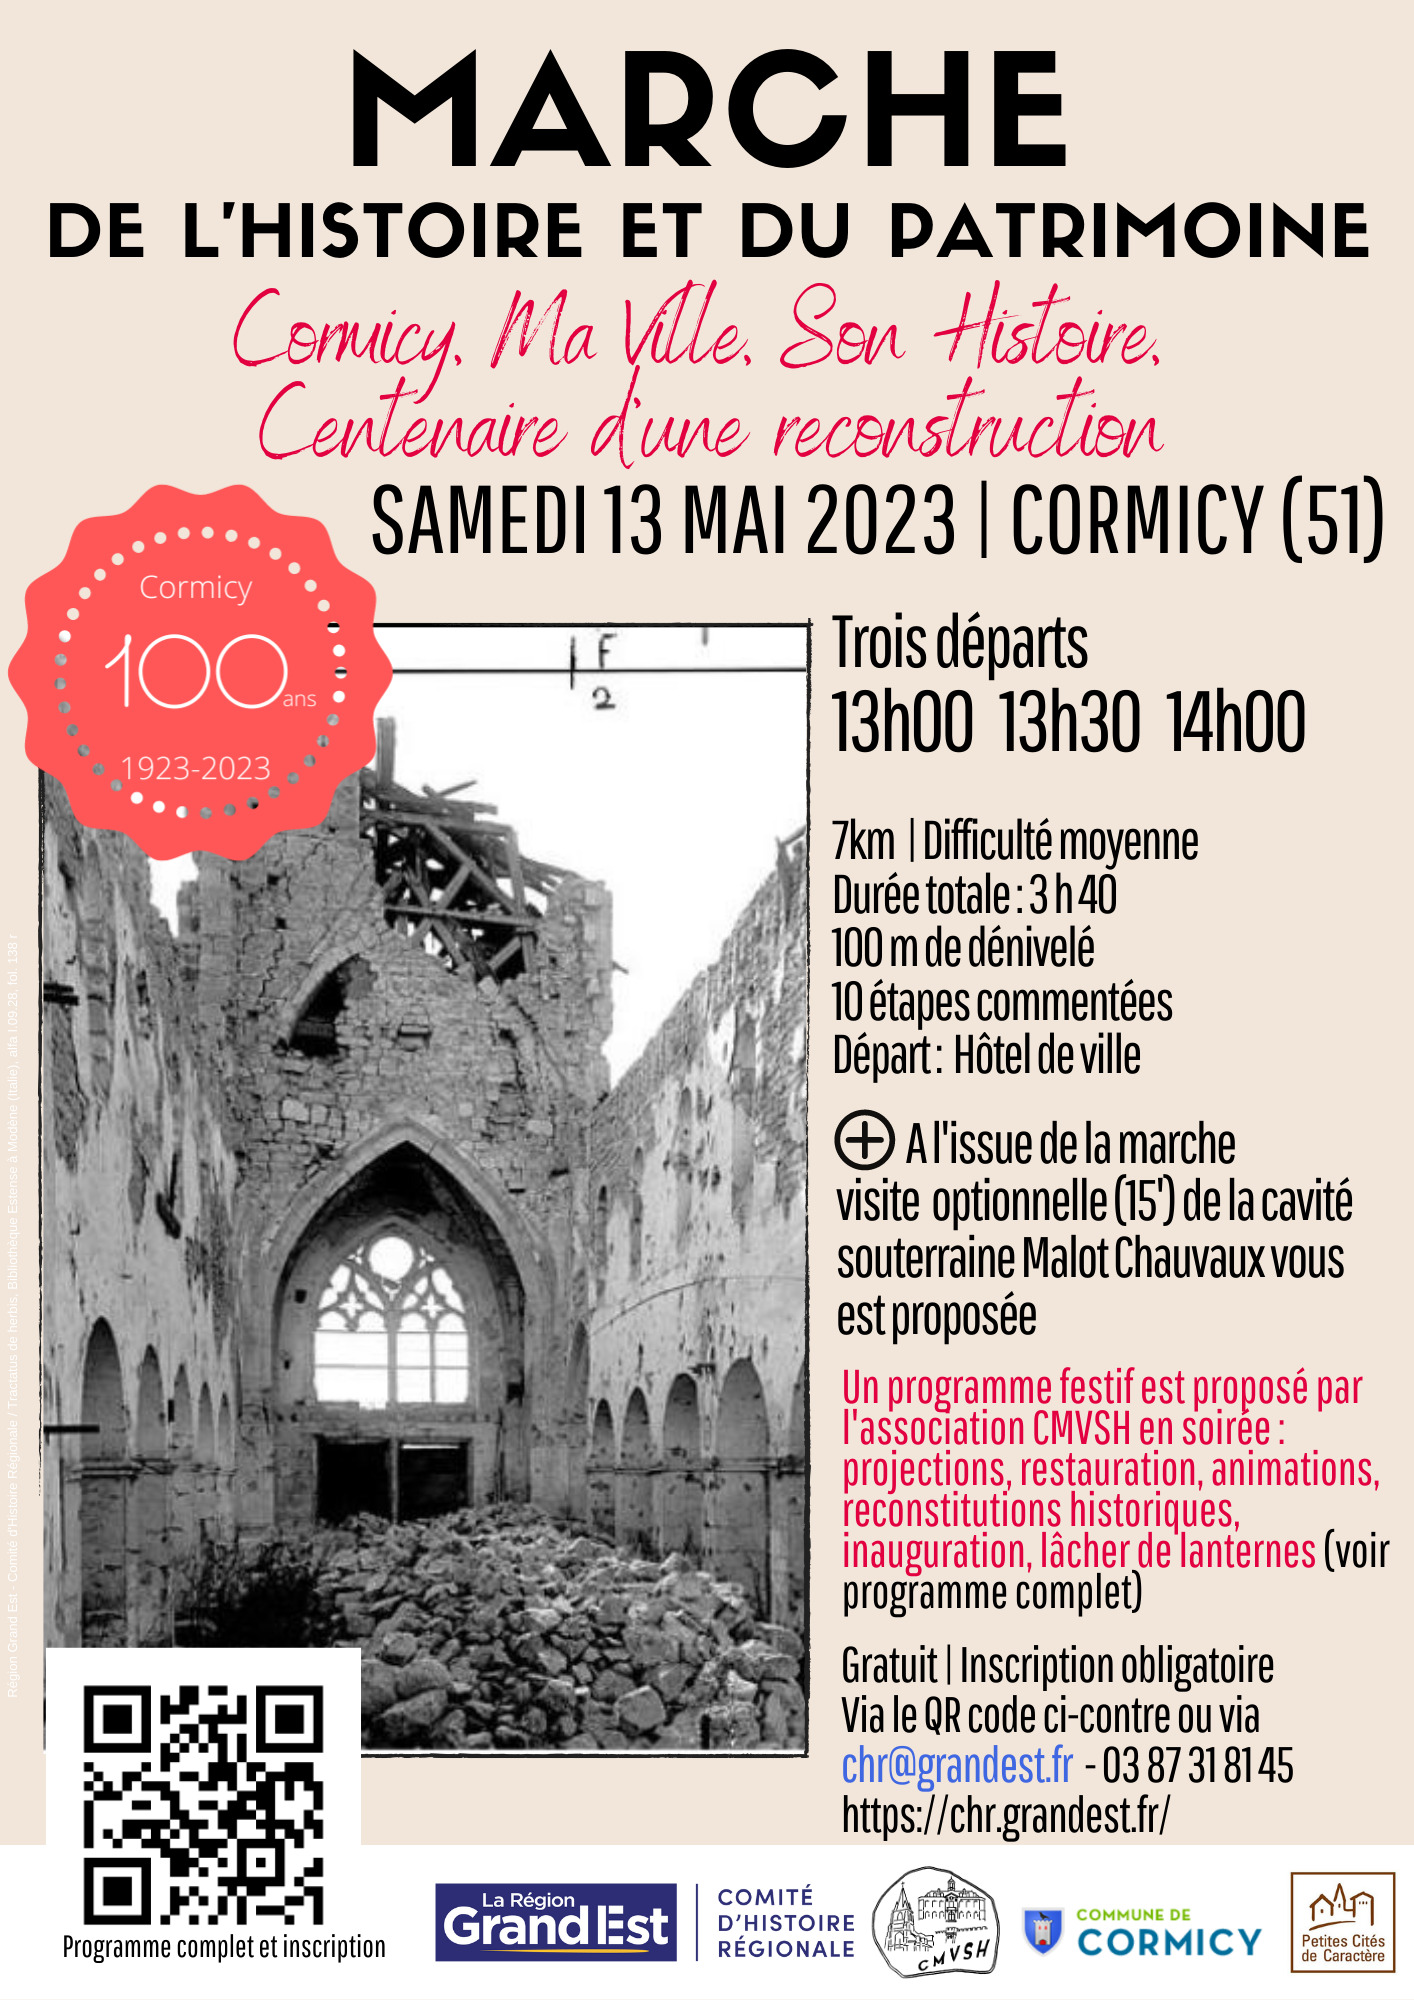 Marche Cormicy(1)